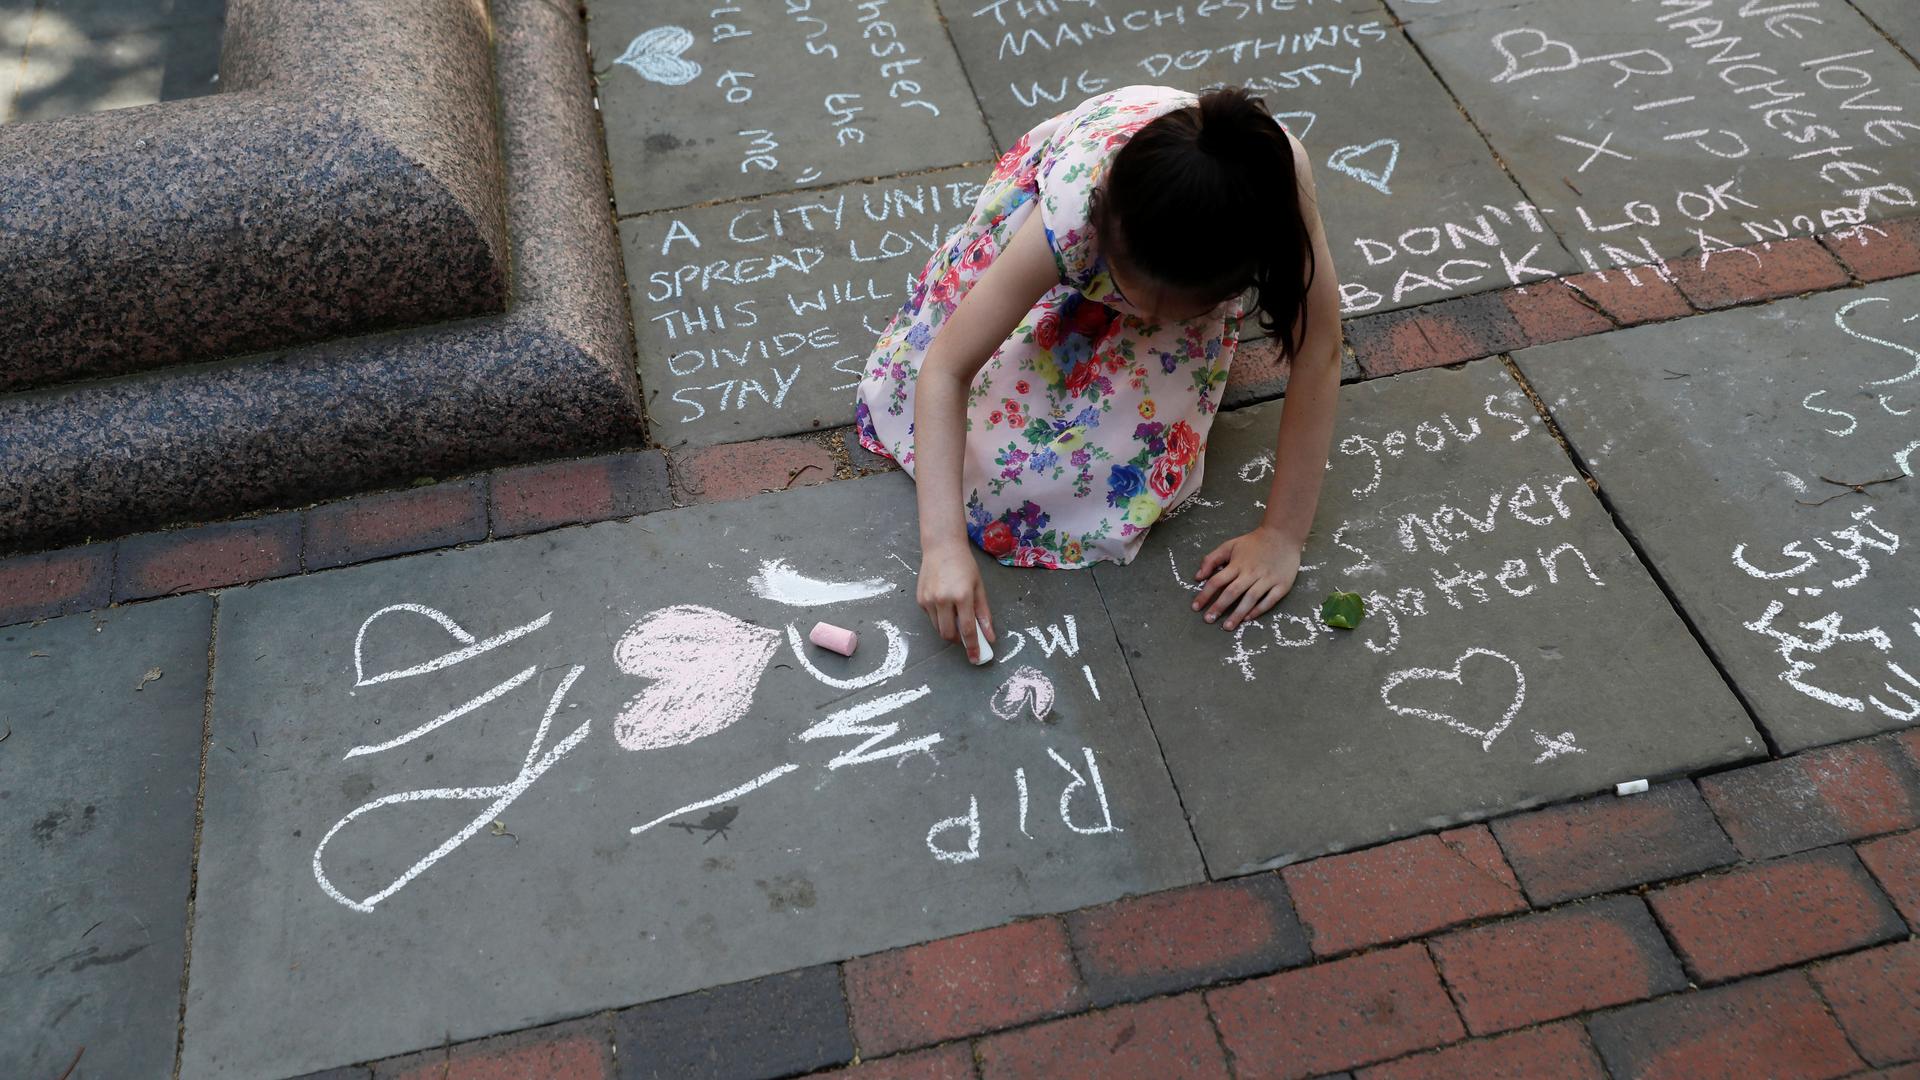 A girl writes a message in chalk on the pavement in central Manchester, Britain.